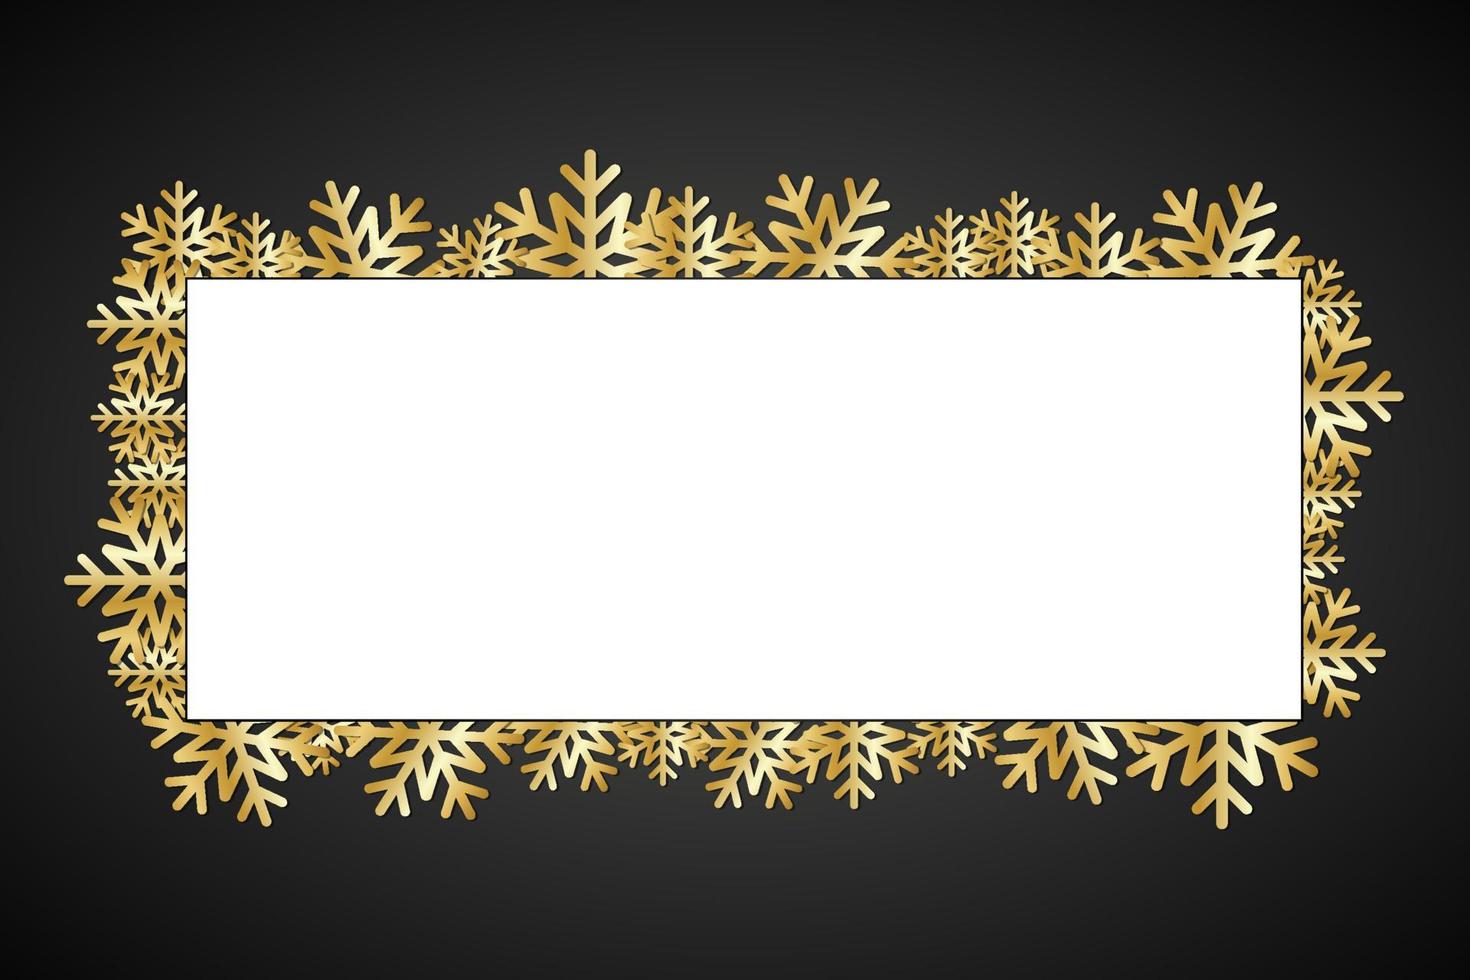 Golded christmas snowflakes background with space for your wishes, simple holiday card with snowflakes vector